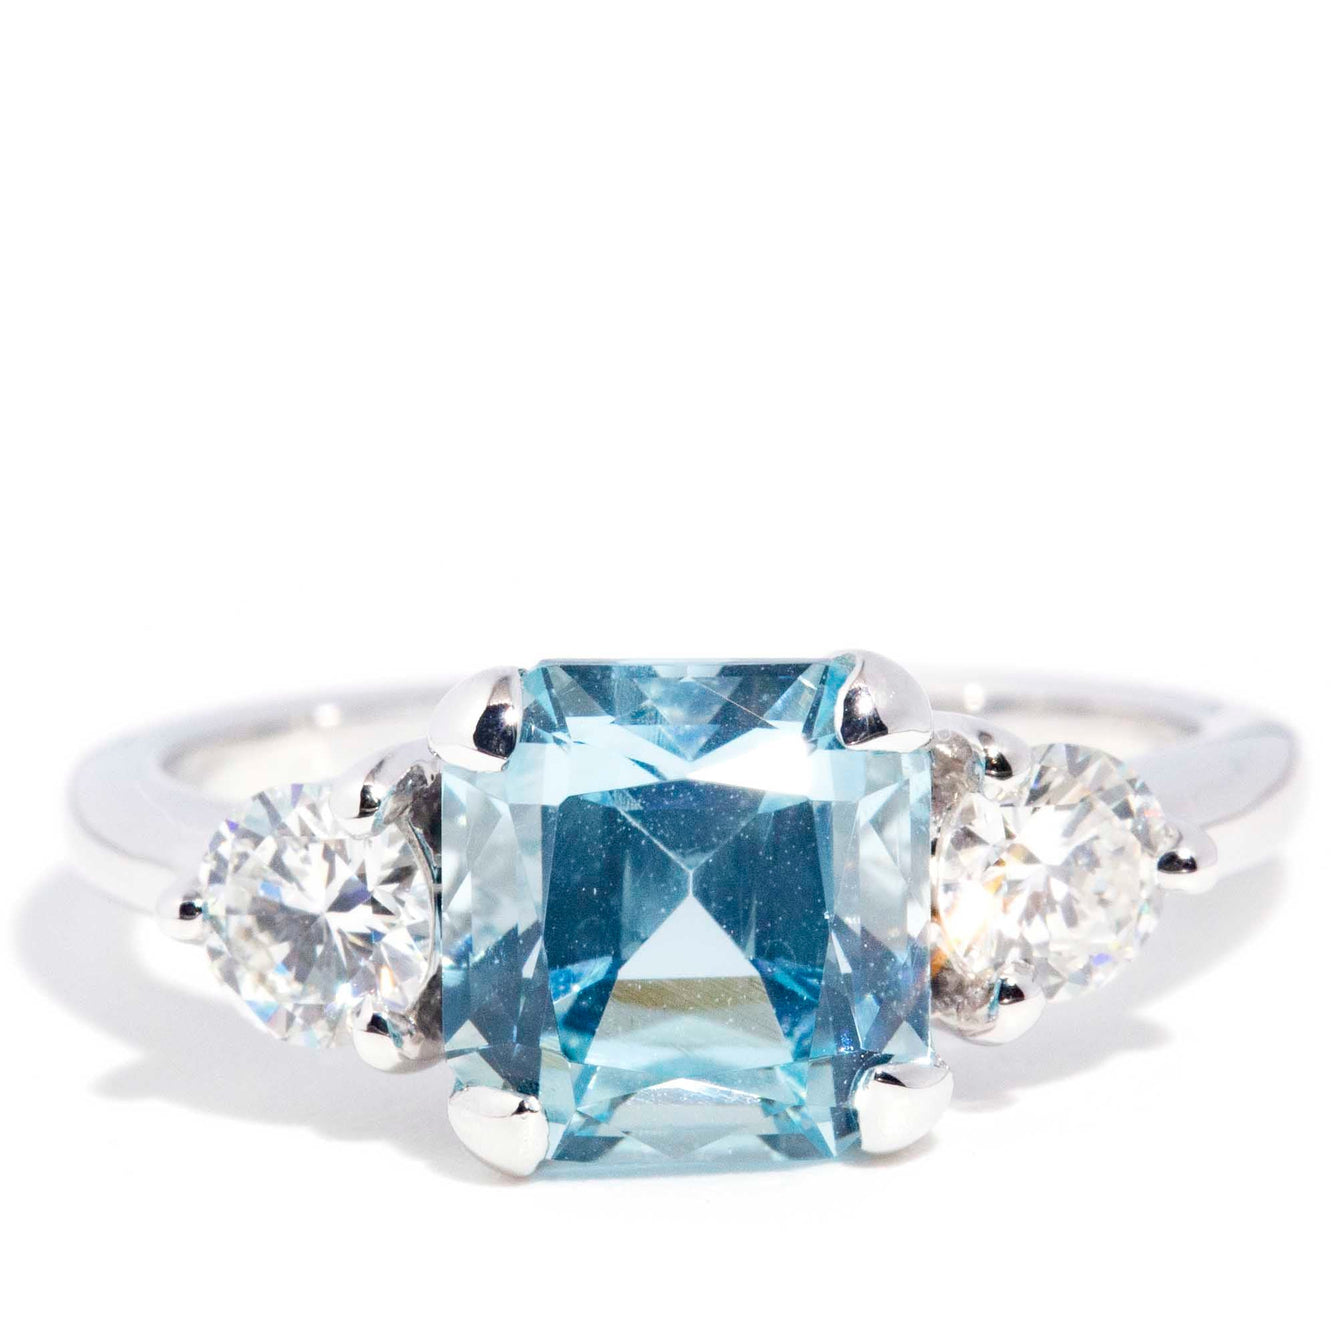 Francine 2.49ct Aquamarine & 0.58ct Certified Diamond 18ct Gold Ring* GTG Rings Imperial Jewellery Imperial Jewellery - Hamilton